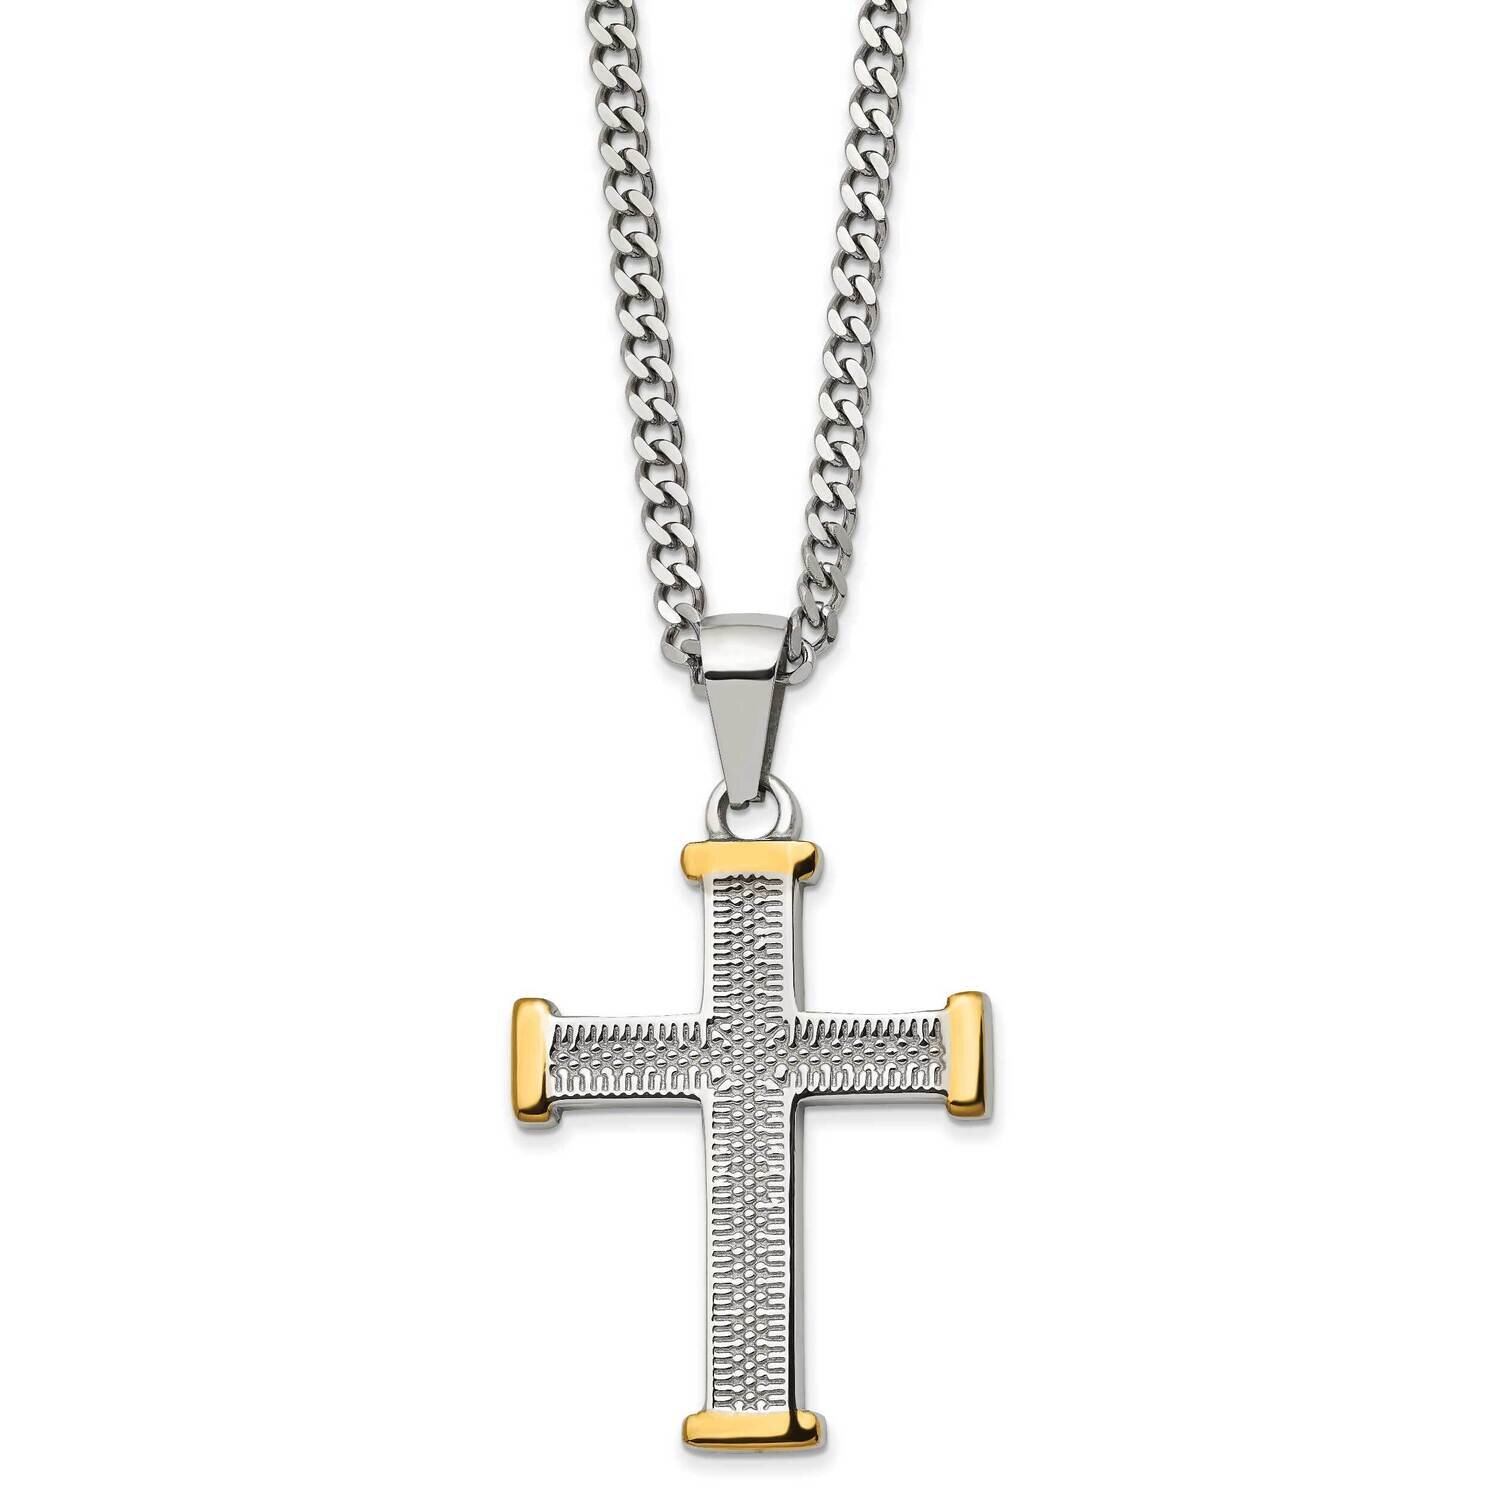 Textured & Polished Yellow Ip-Plated Cross 22 Inch Necklace Stainless Steel SRN2970-22